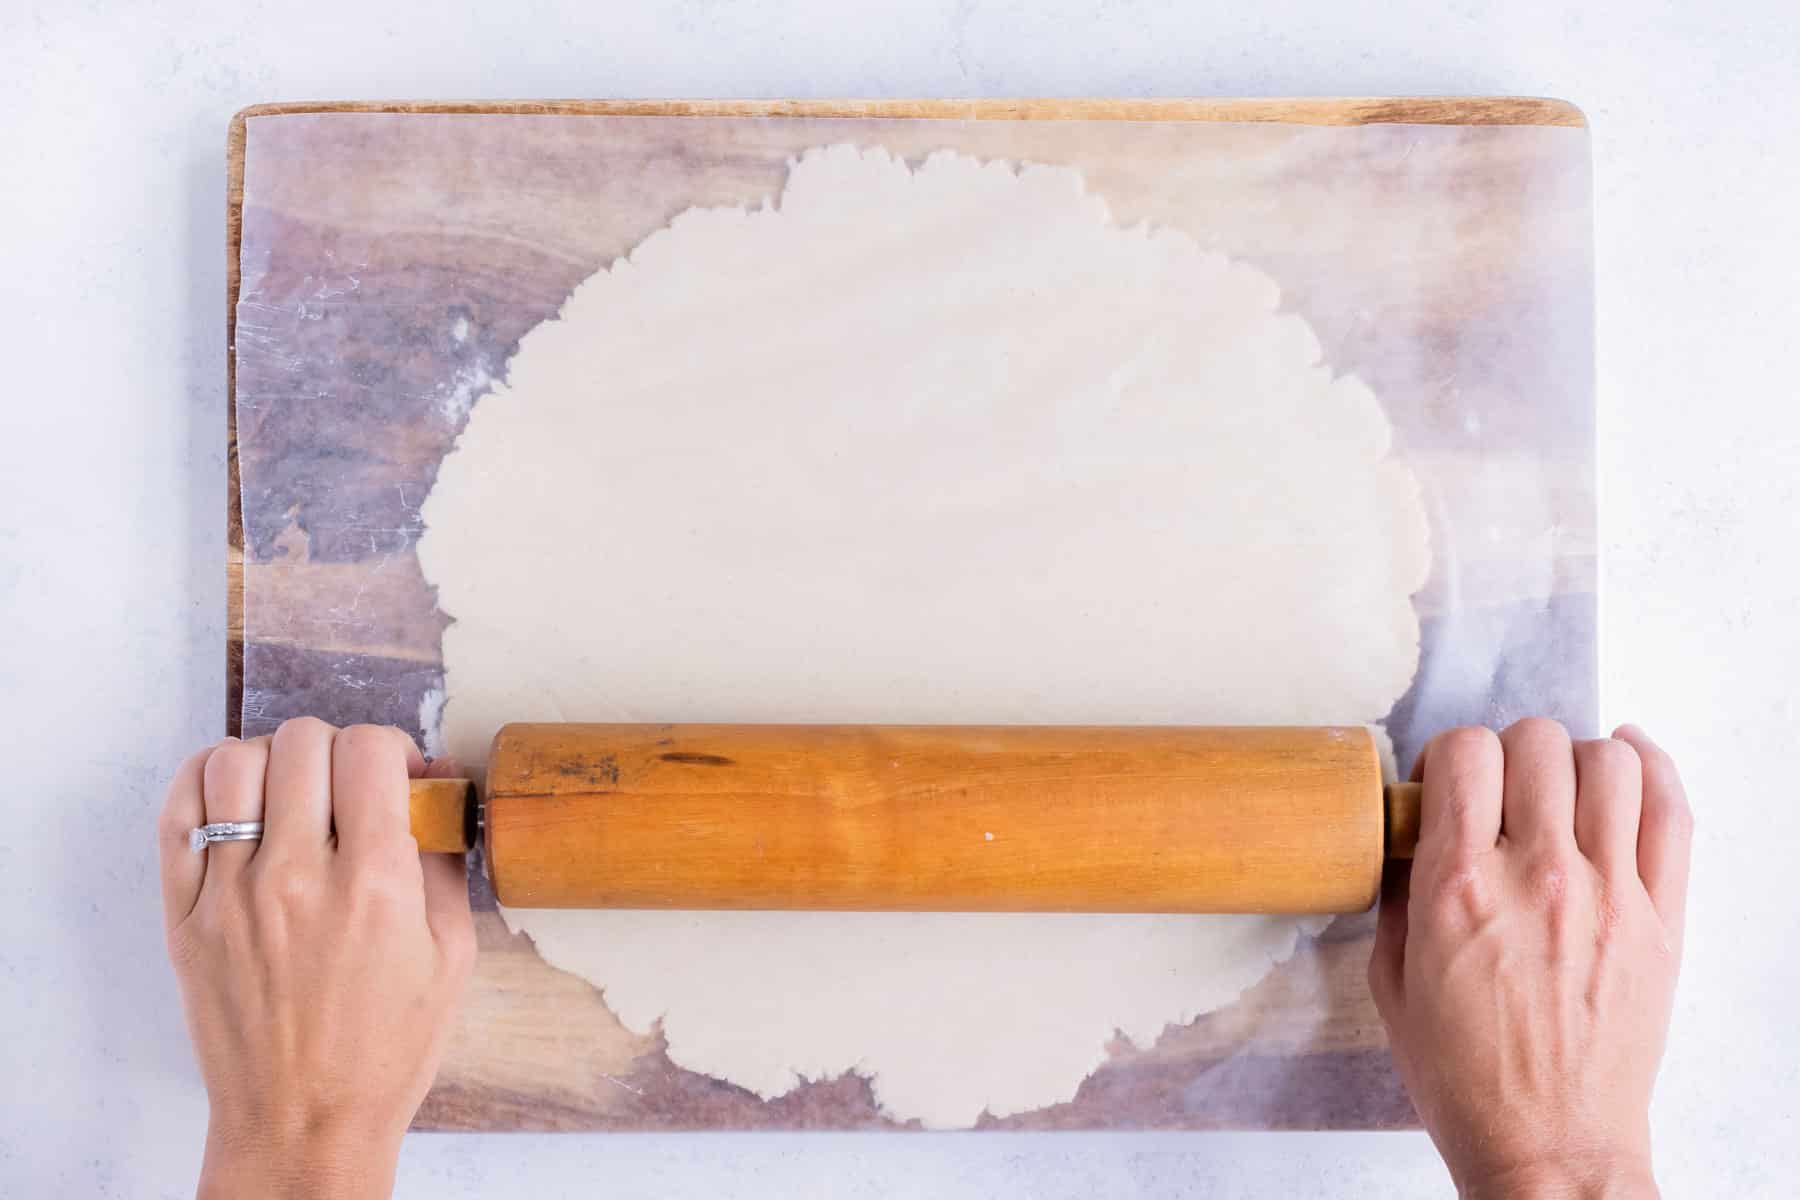 Wax Paper vs. Parchment Paper: What's the Difference?